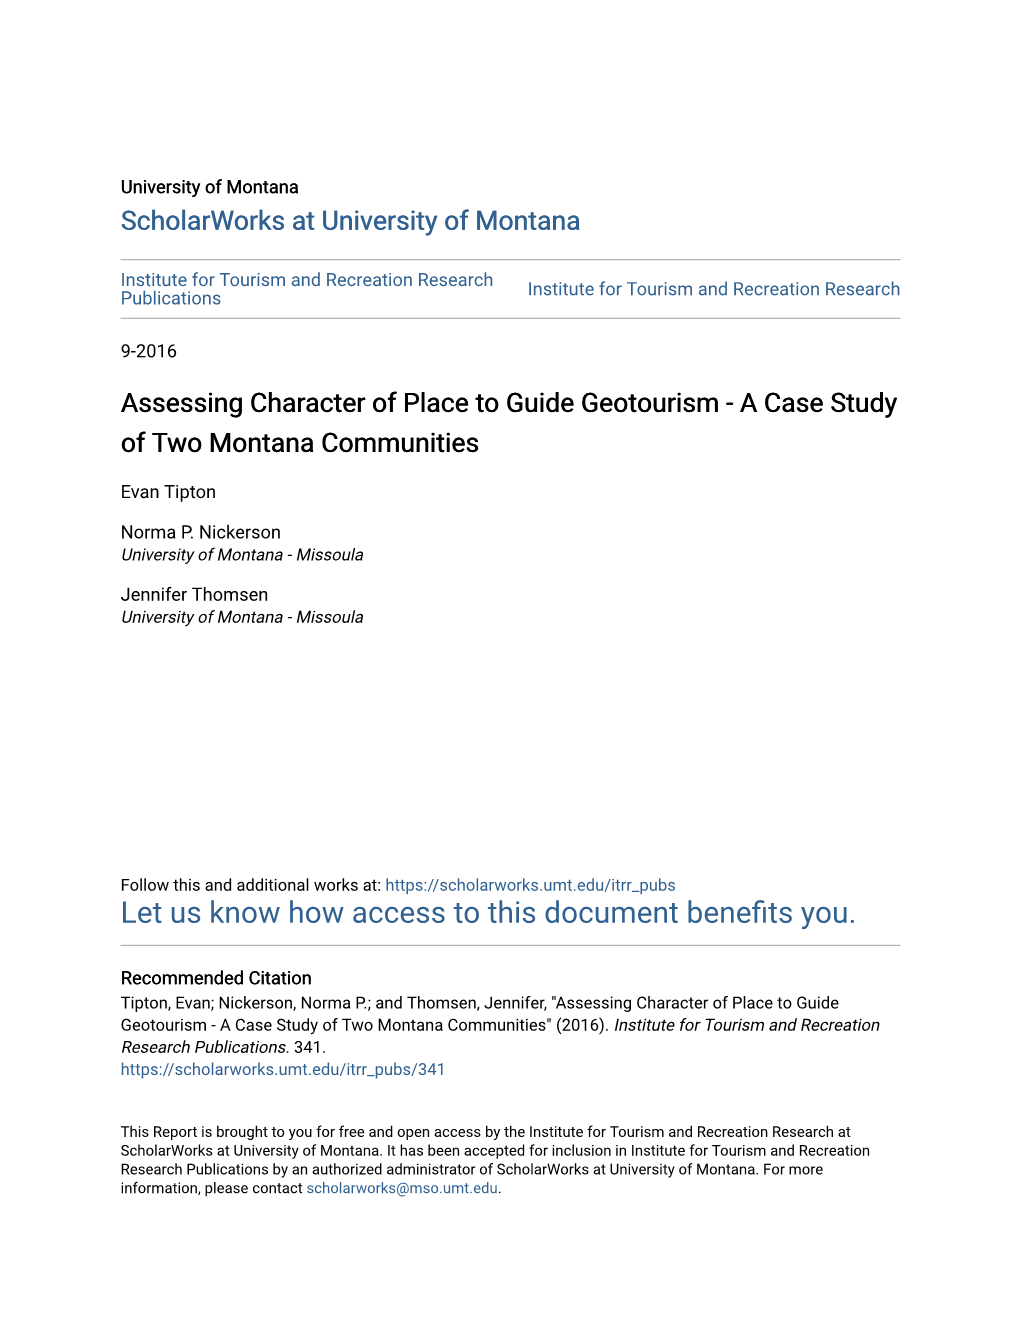 Assessing Character of Place to Guide Geotourism - a Case Study of Two Montana Communities